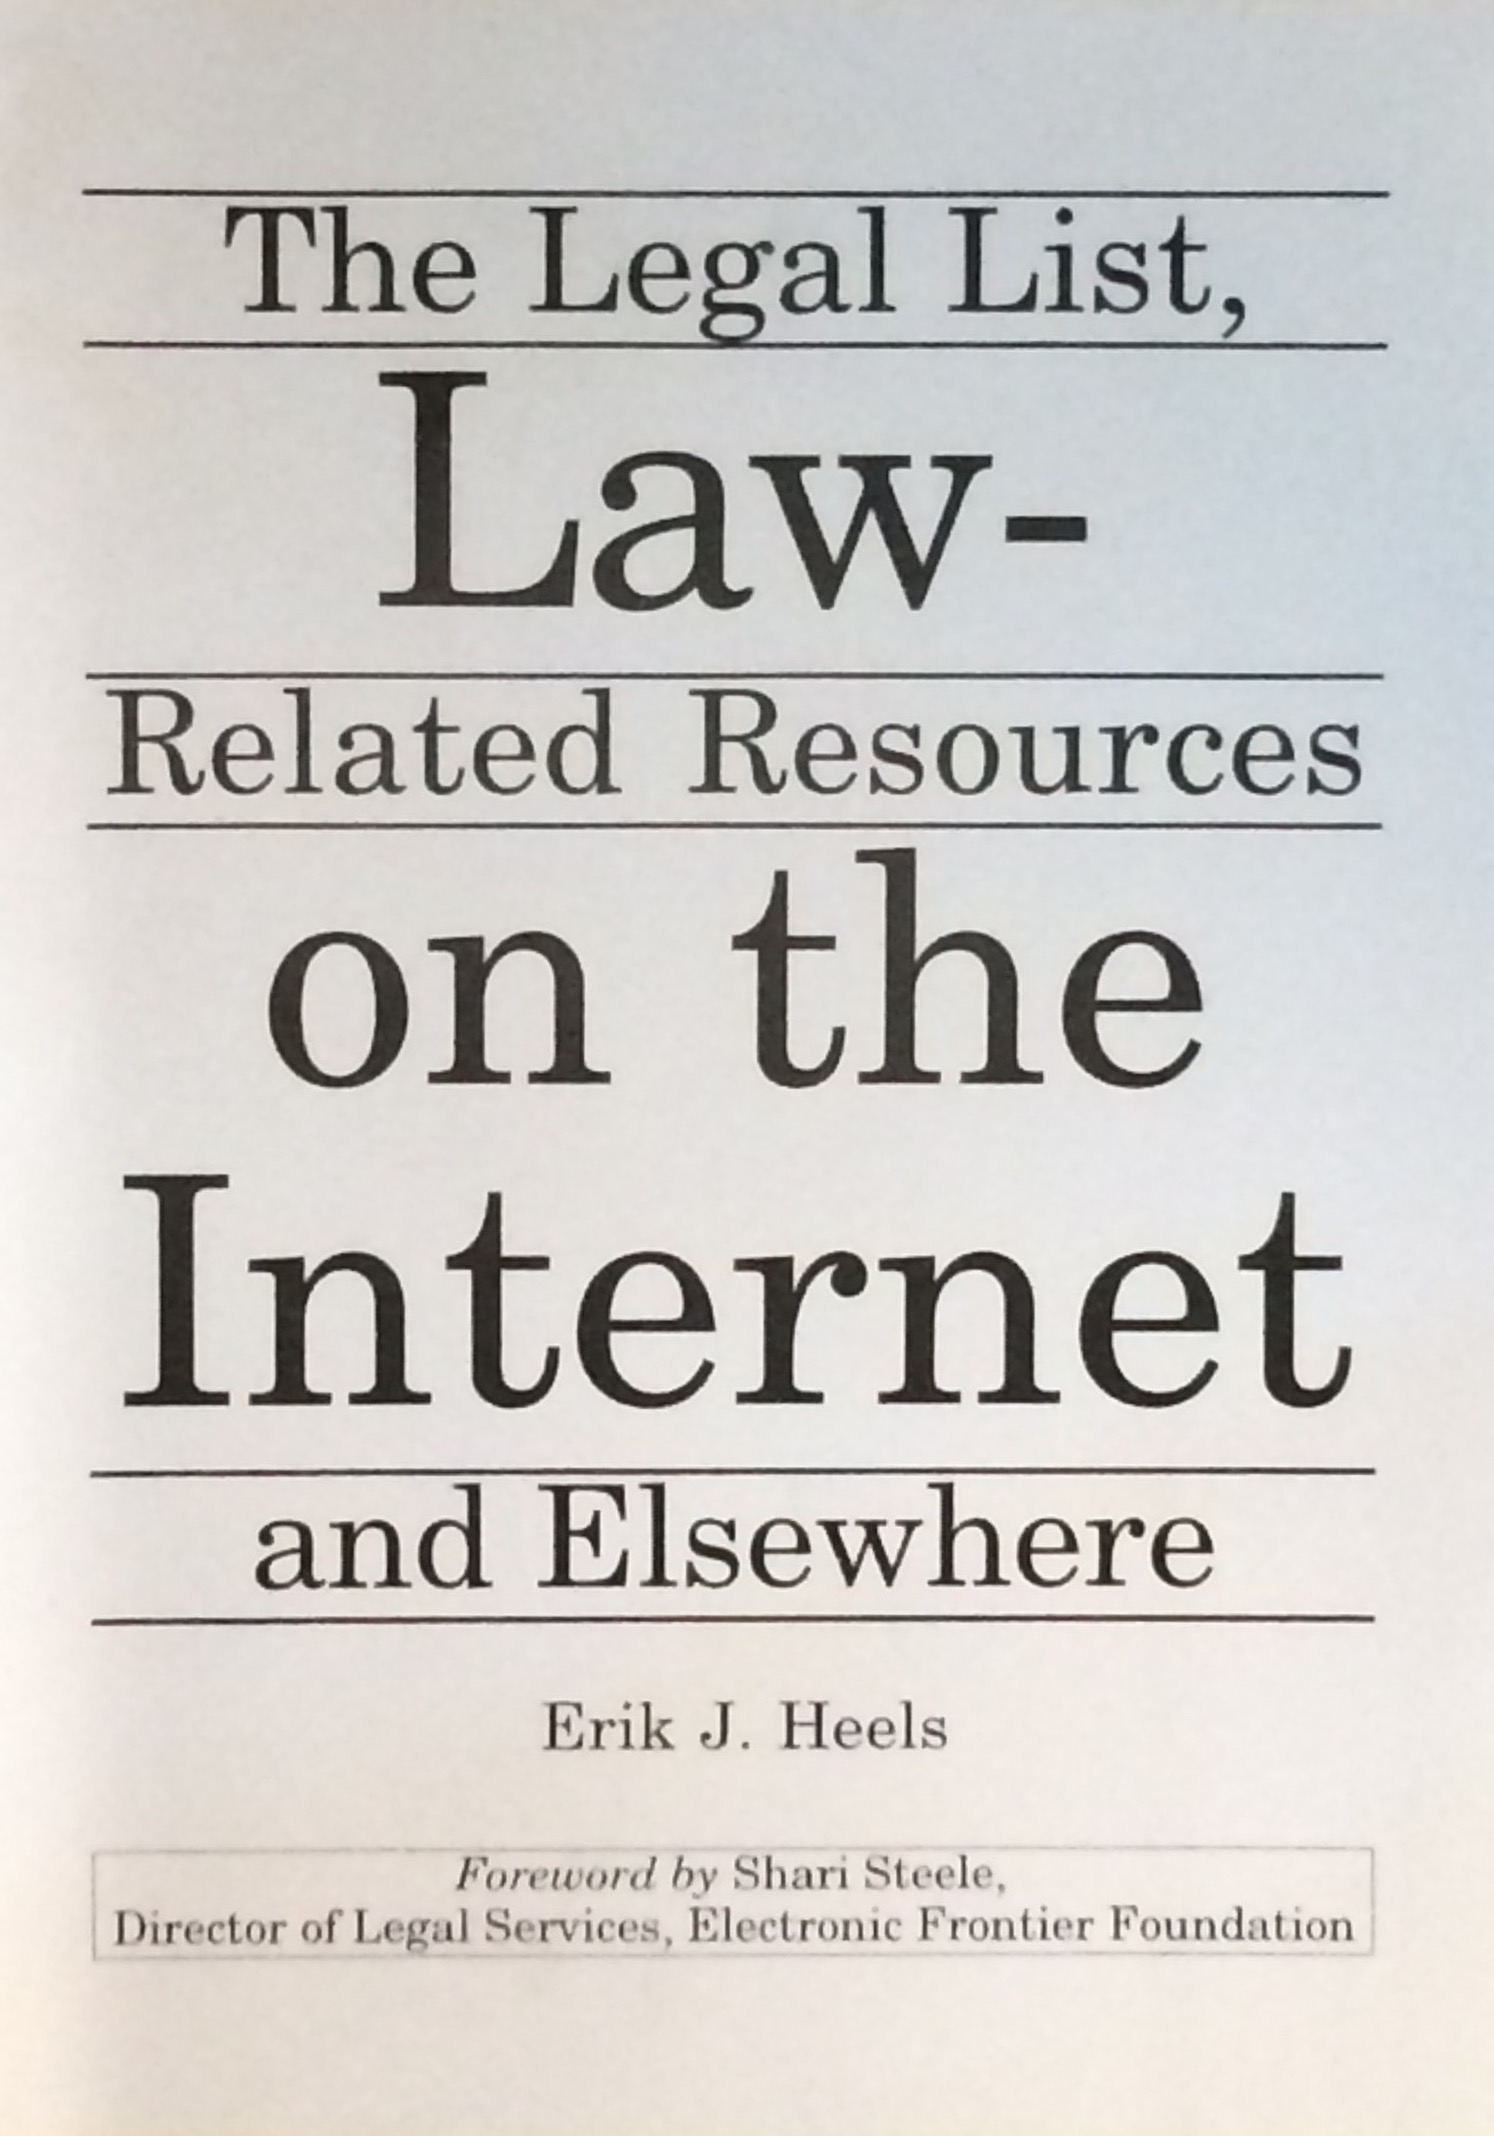 The Legal List, Law-Related Resources on the Internet and Elsewhere (v5.1)